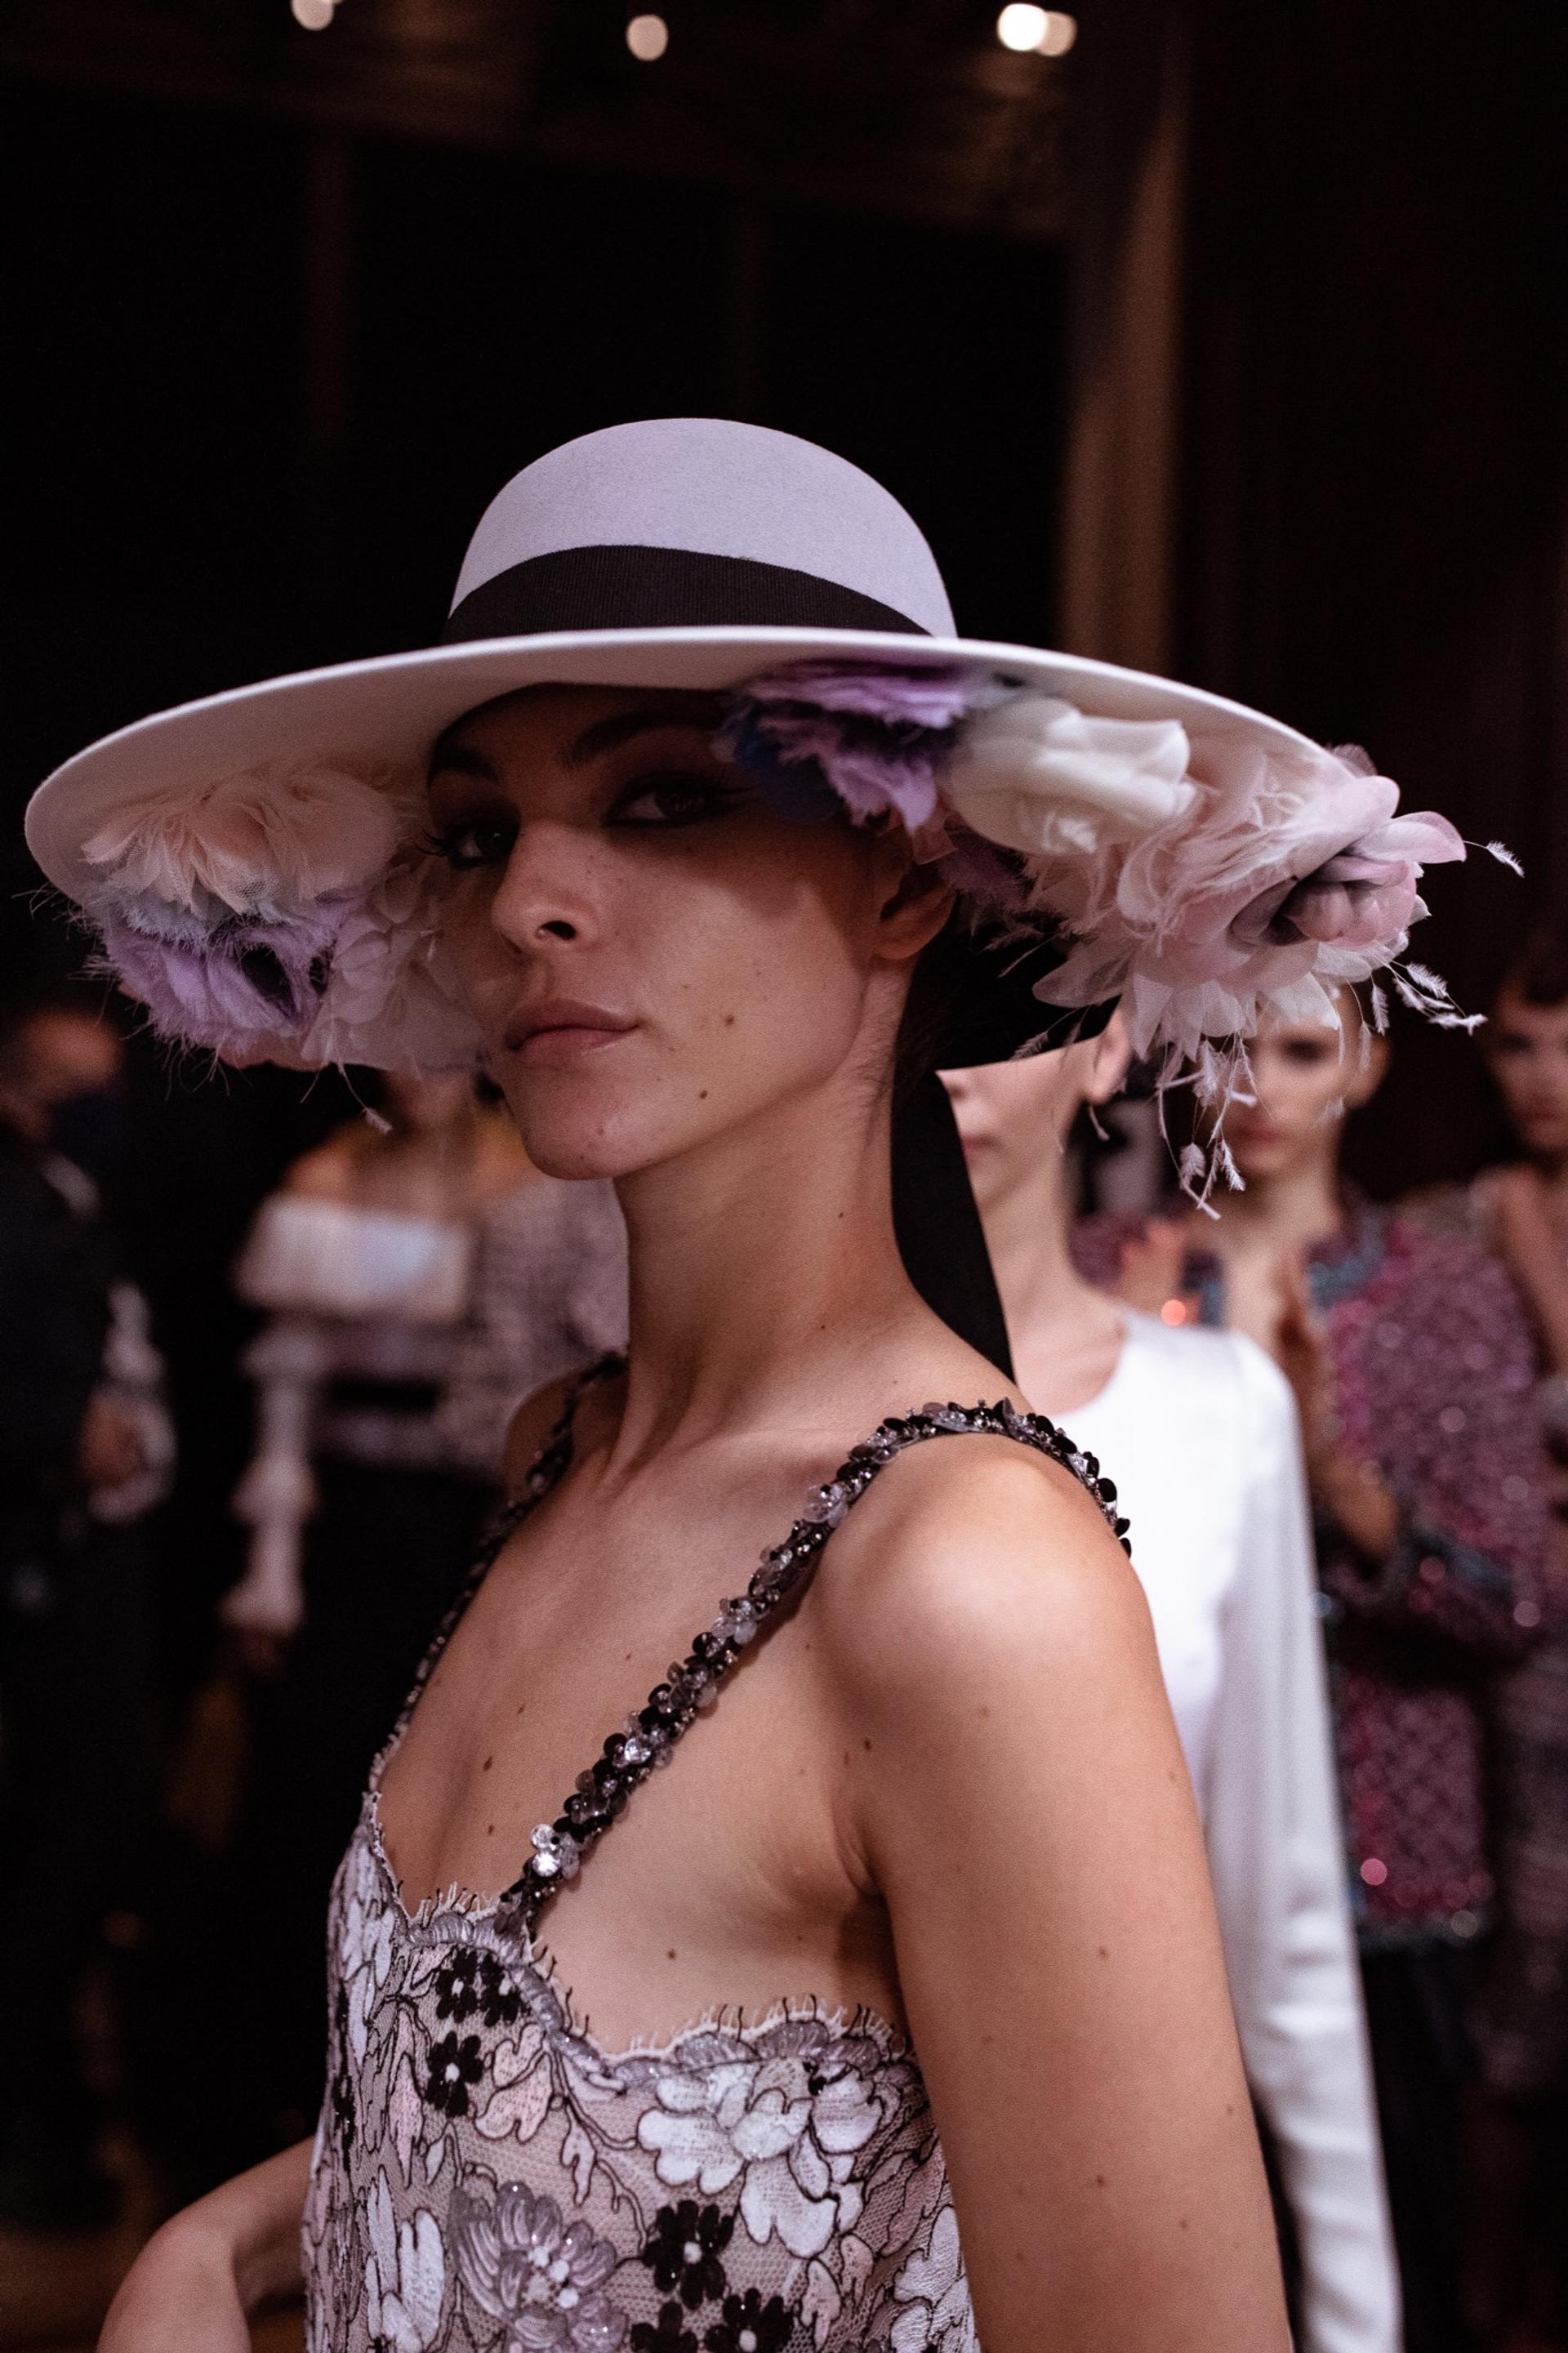 Backstage at Chanel Couture, AW 2021/2022